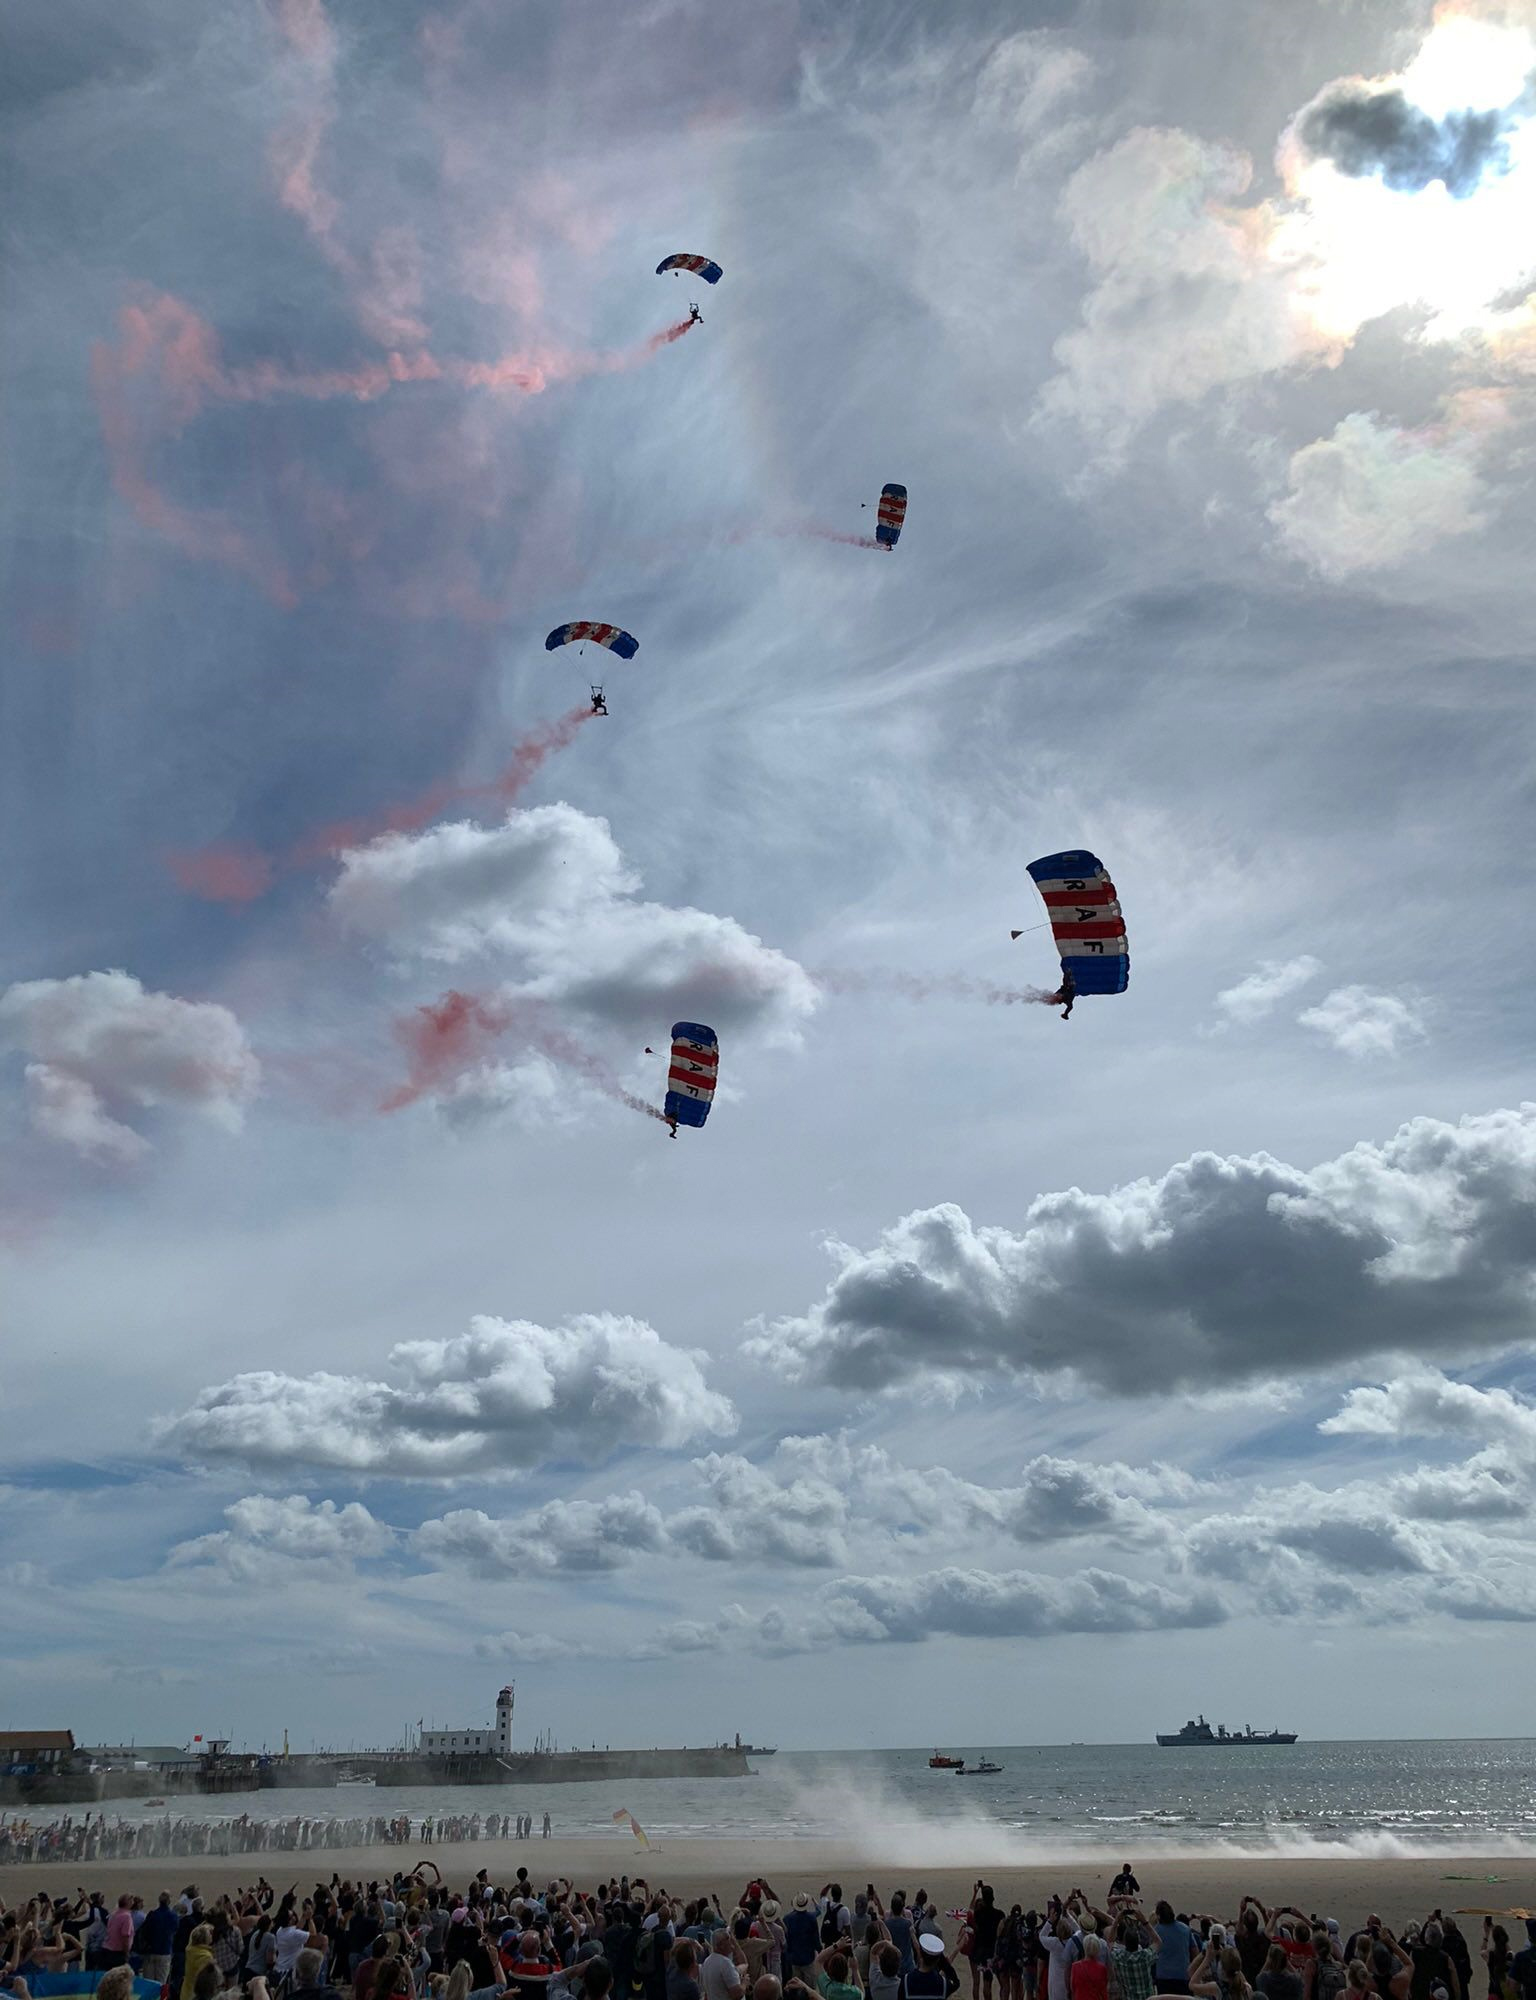 RAF Falcons - National Armed Forces Day Celebrations in Scarborough